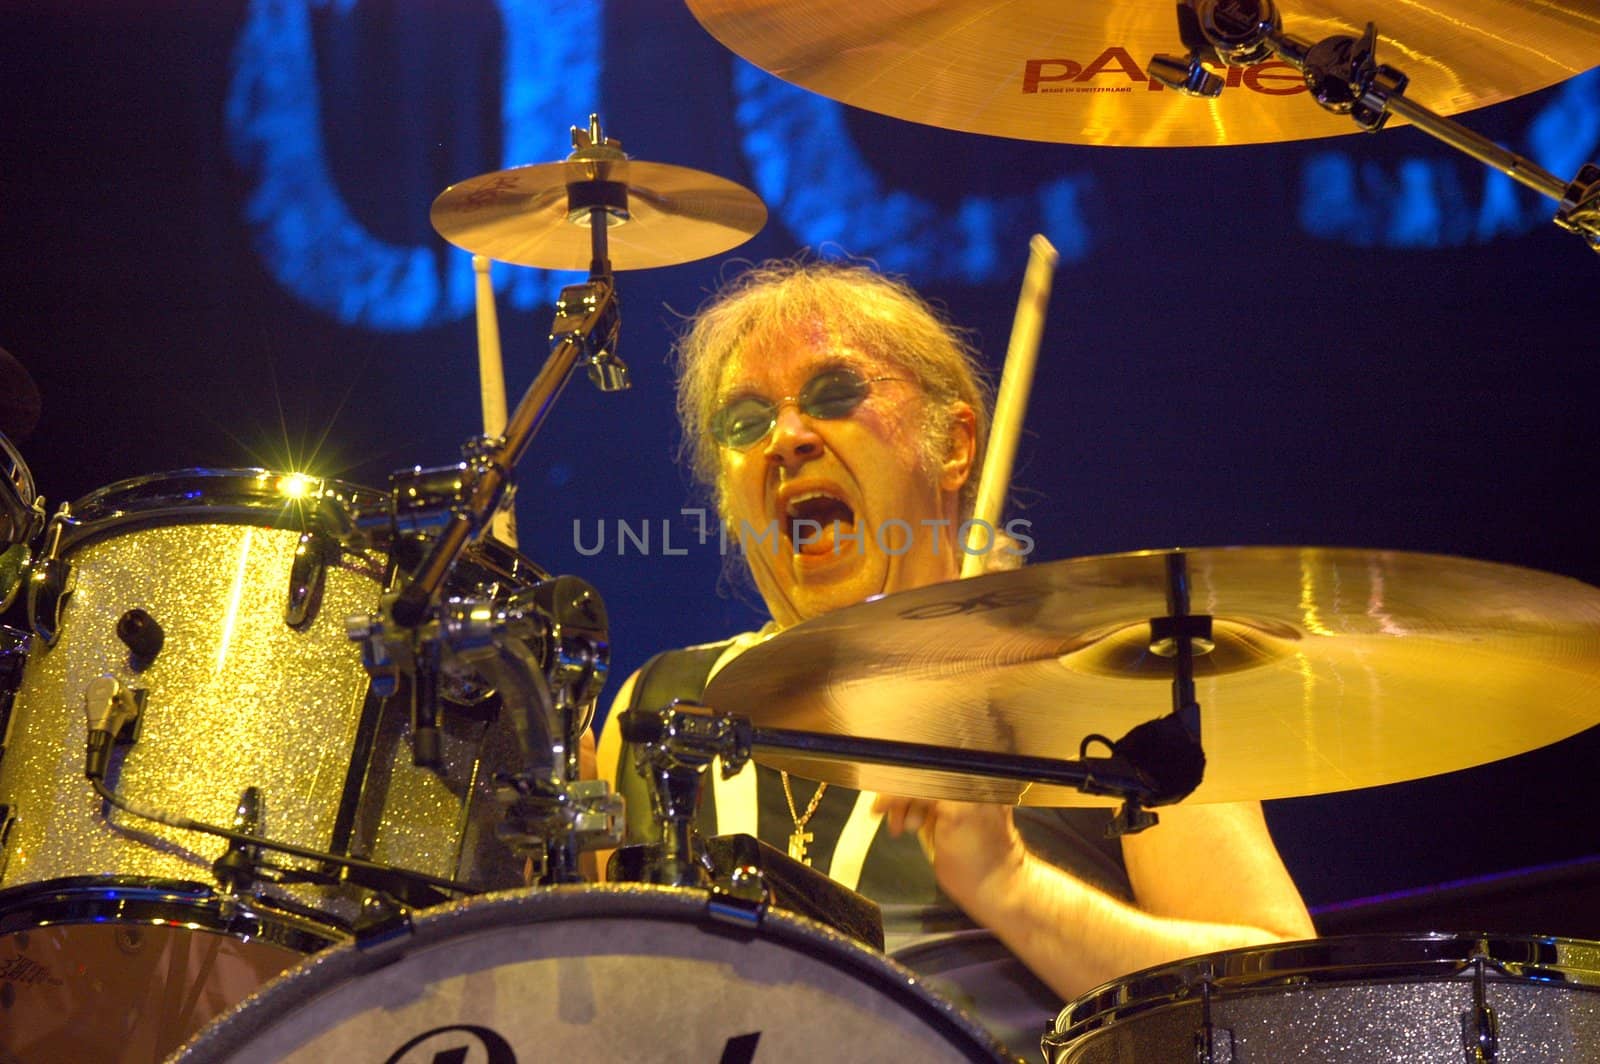 BRNO, CZECH REP., FEBRUARY-22: Ian Paice on drums of British band Deep Purple in performance at the hall Rondo February 22, 2006 in Brno, Czech Republic. The group arrived as part of tour for the new album Rapture Of The Deep. by haak78